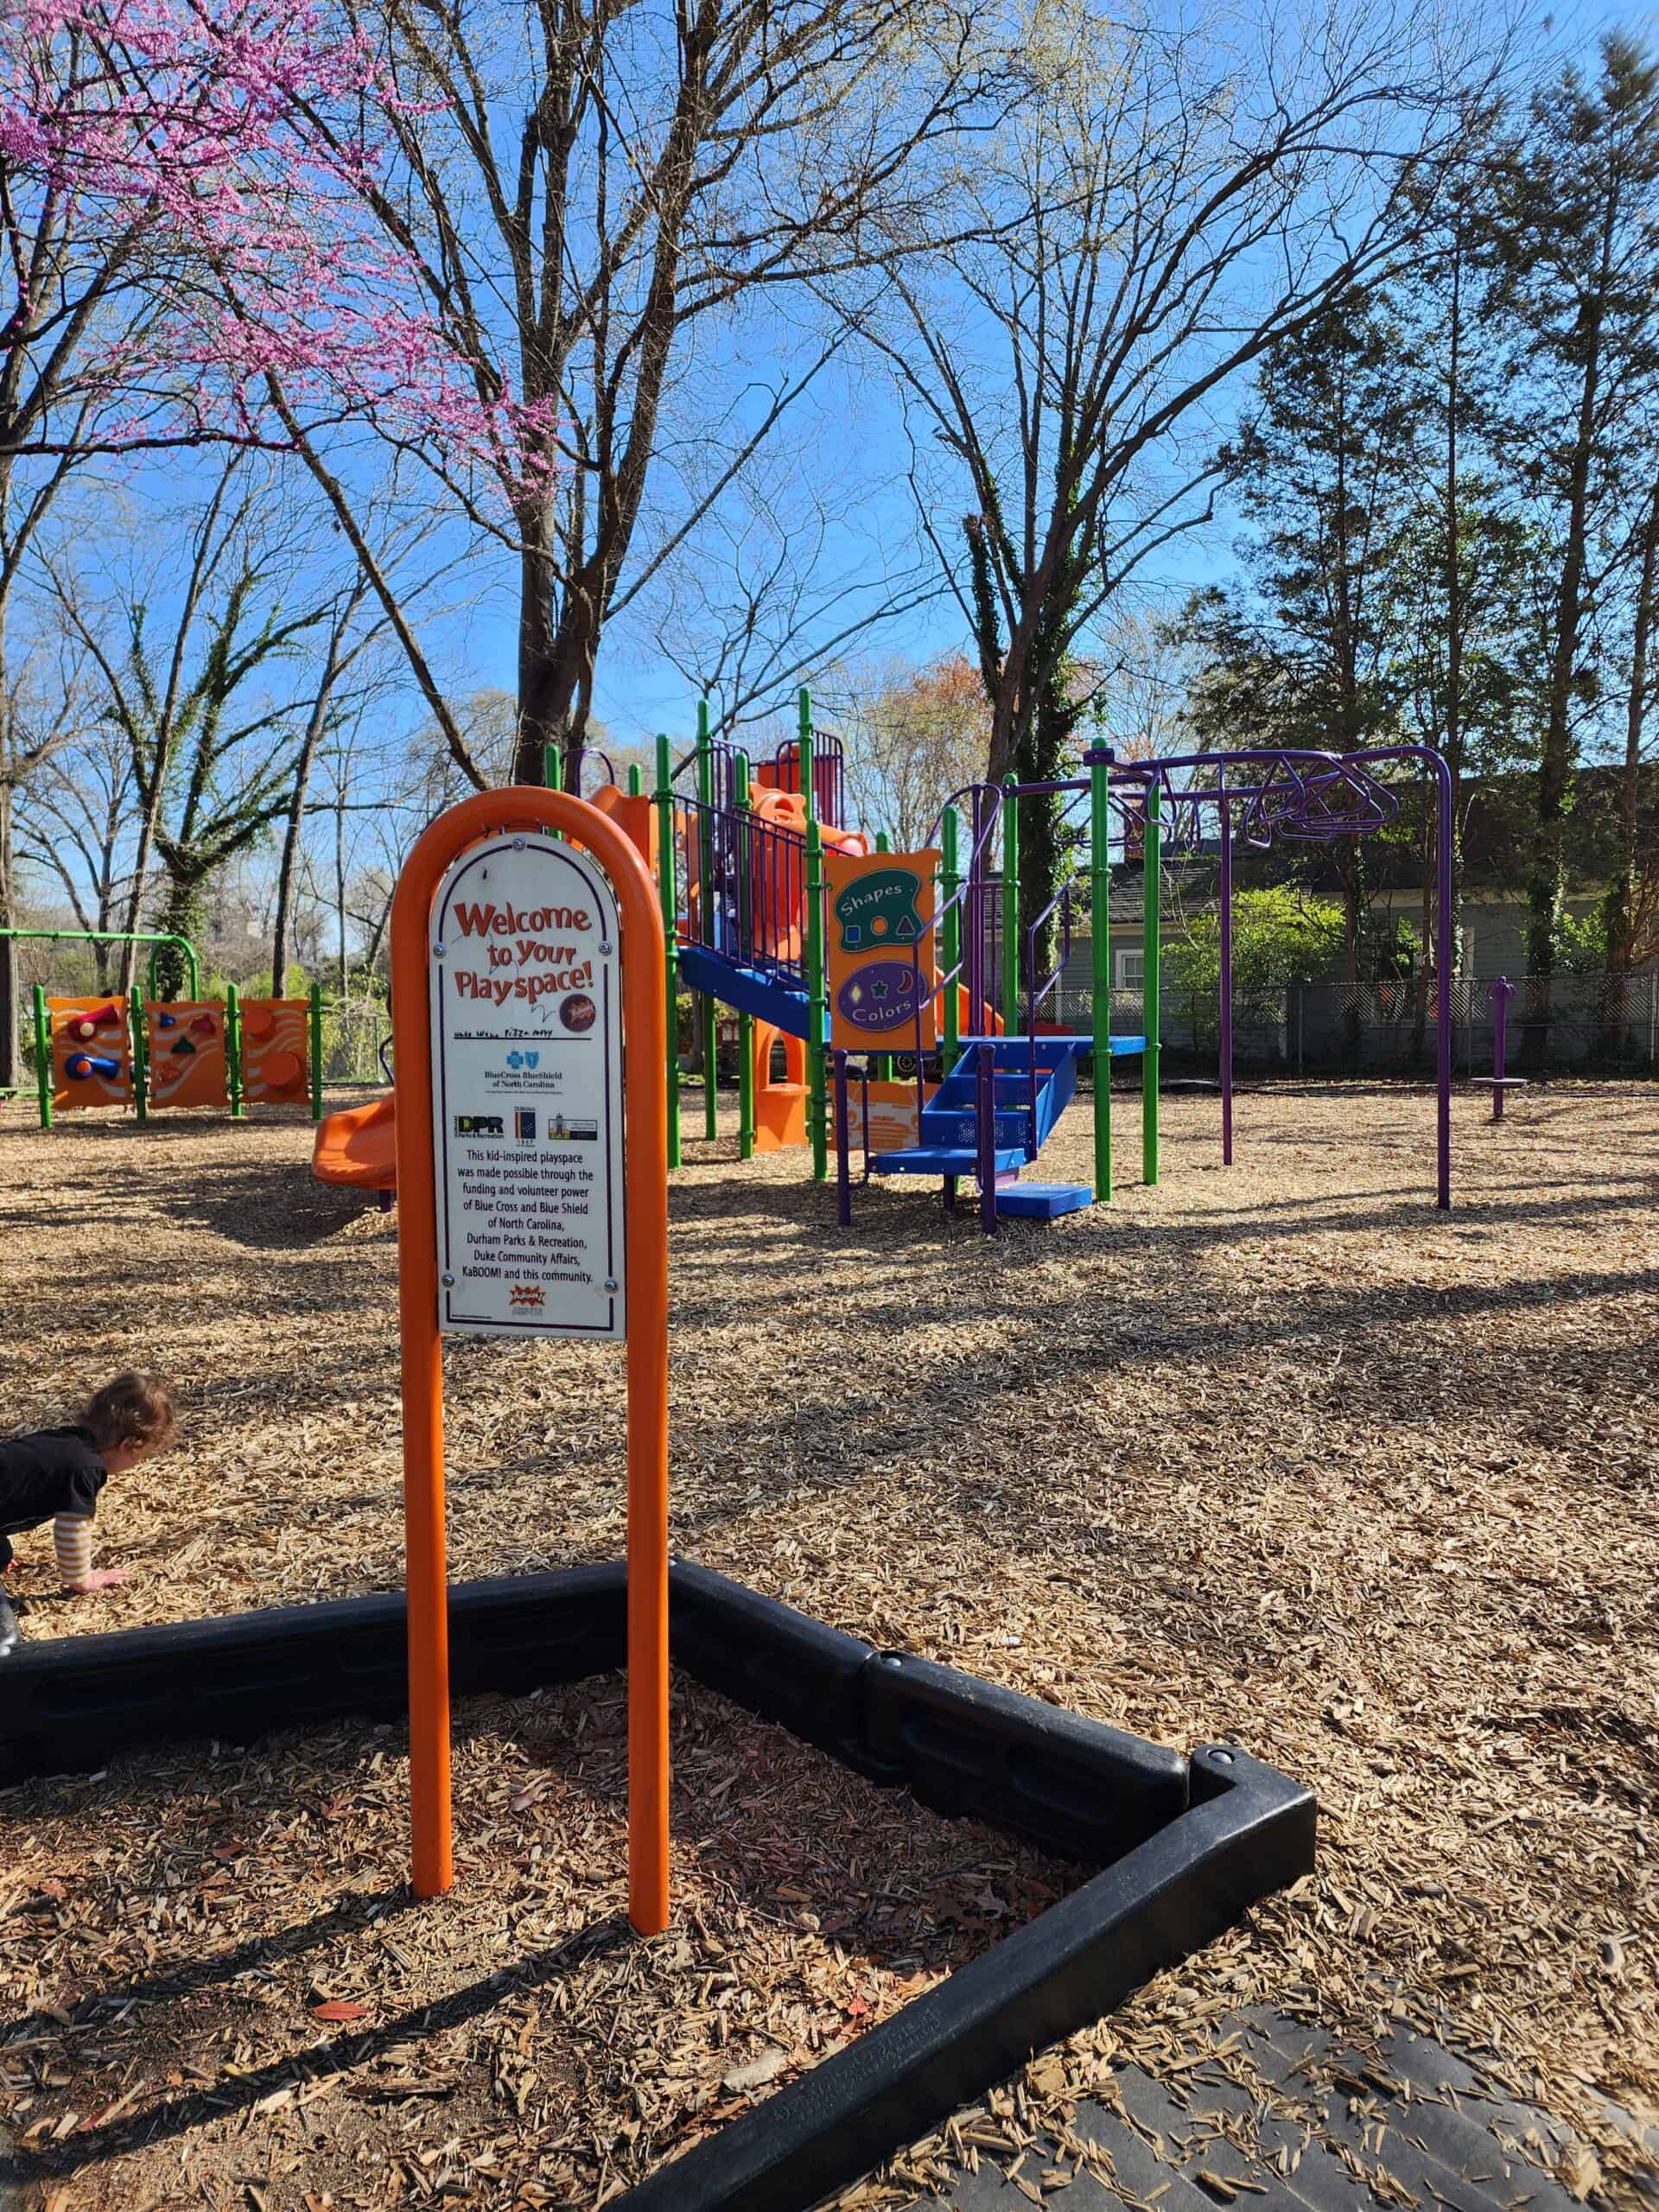 The entrance to Burch Avenue Playground is marked by a vibrant orange sign that reads 'Welcome to Your Playspace!' with a colorful, multi-structure playground in the background. The scene is lively with children playing, a blossoming pink tree, and a clear blue sky.